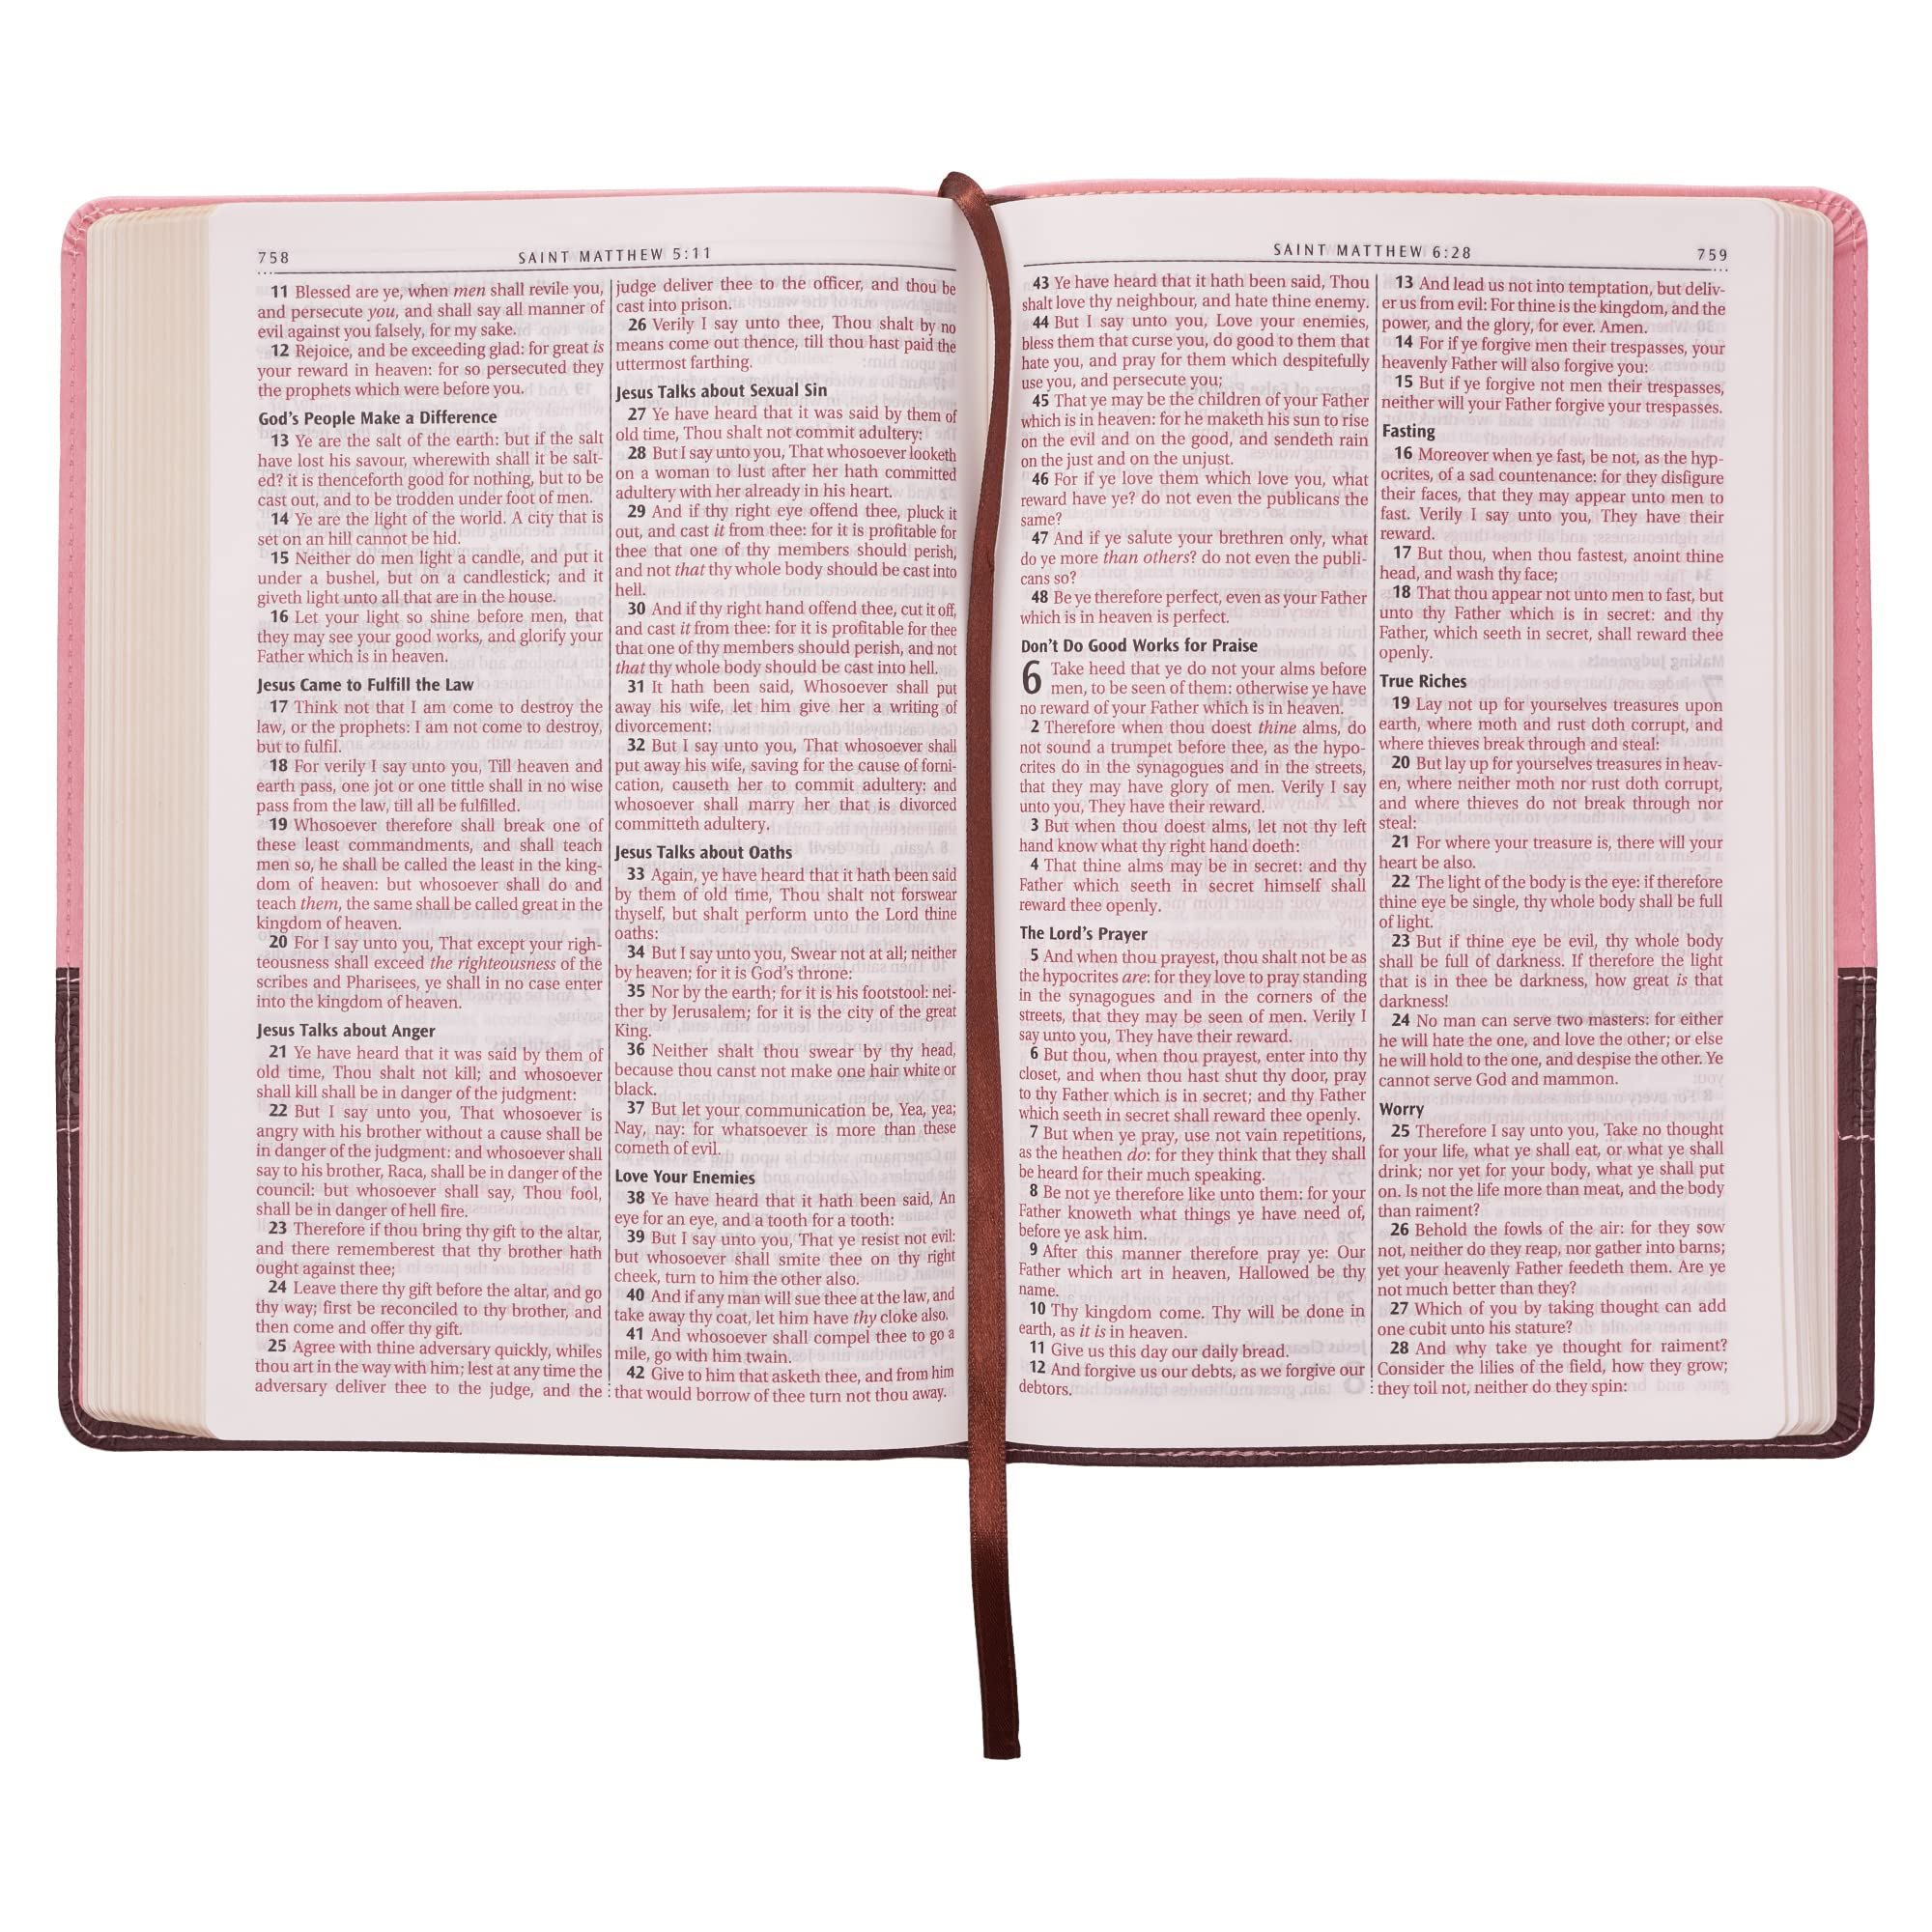 KJV Holy Bible, Thinline Large Print, Pink and Brown Faux Leather w/Ribbon Marker, Red Letter, King James Version